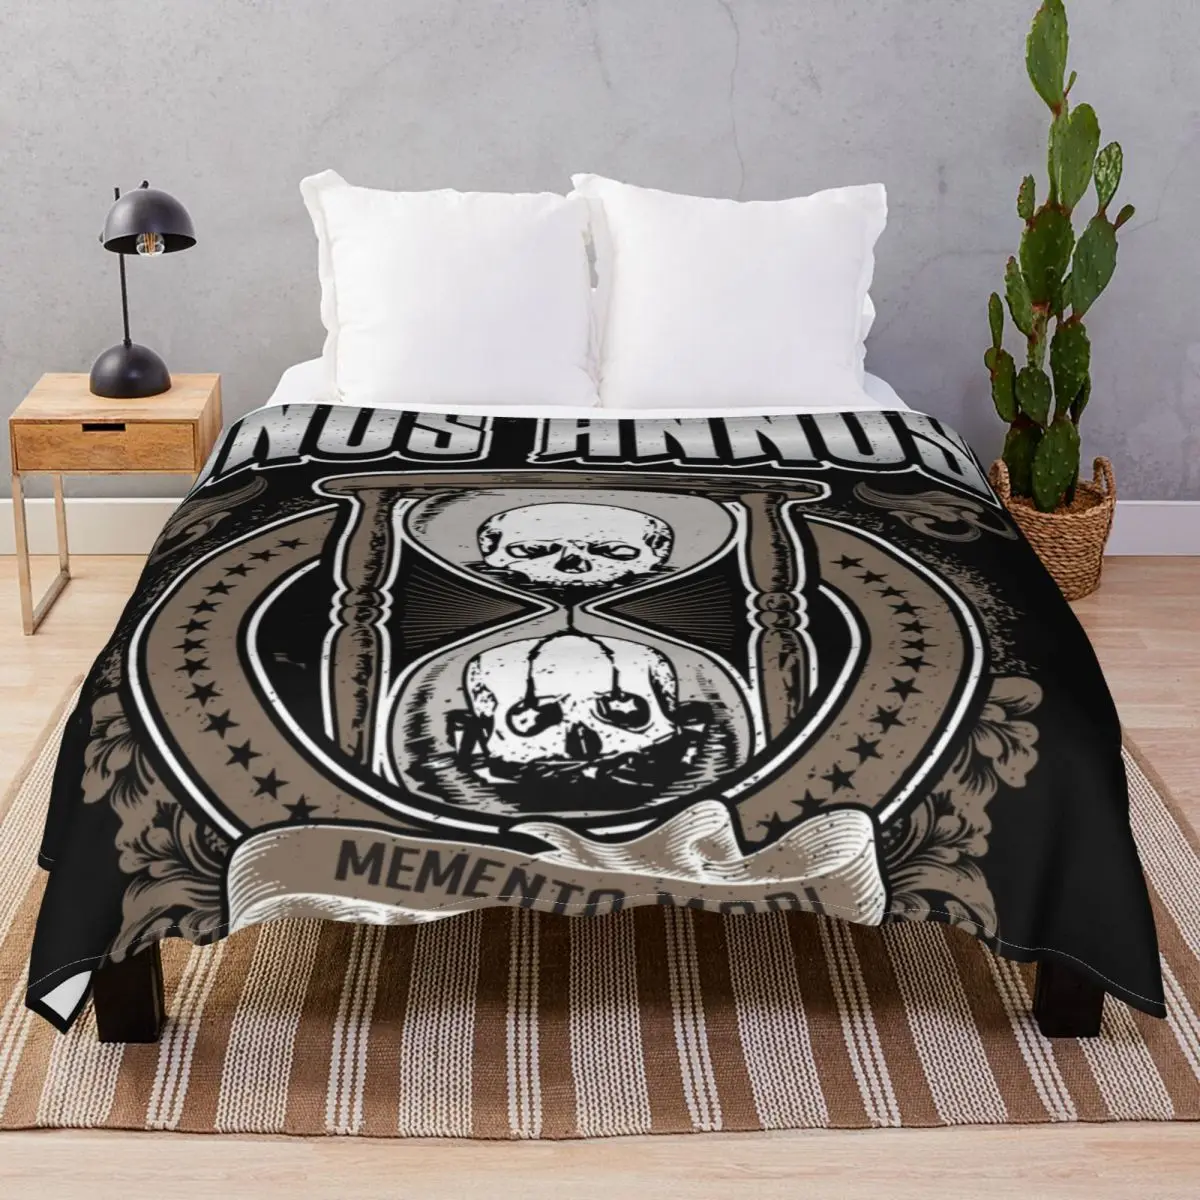 Unus Annus Logo Blankets Flannel Printed Lightweight Throw Blanket for Bed Home Couch Camp Office